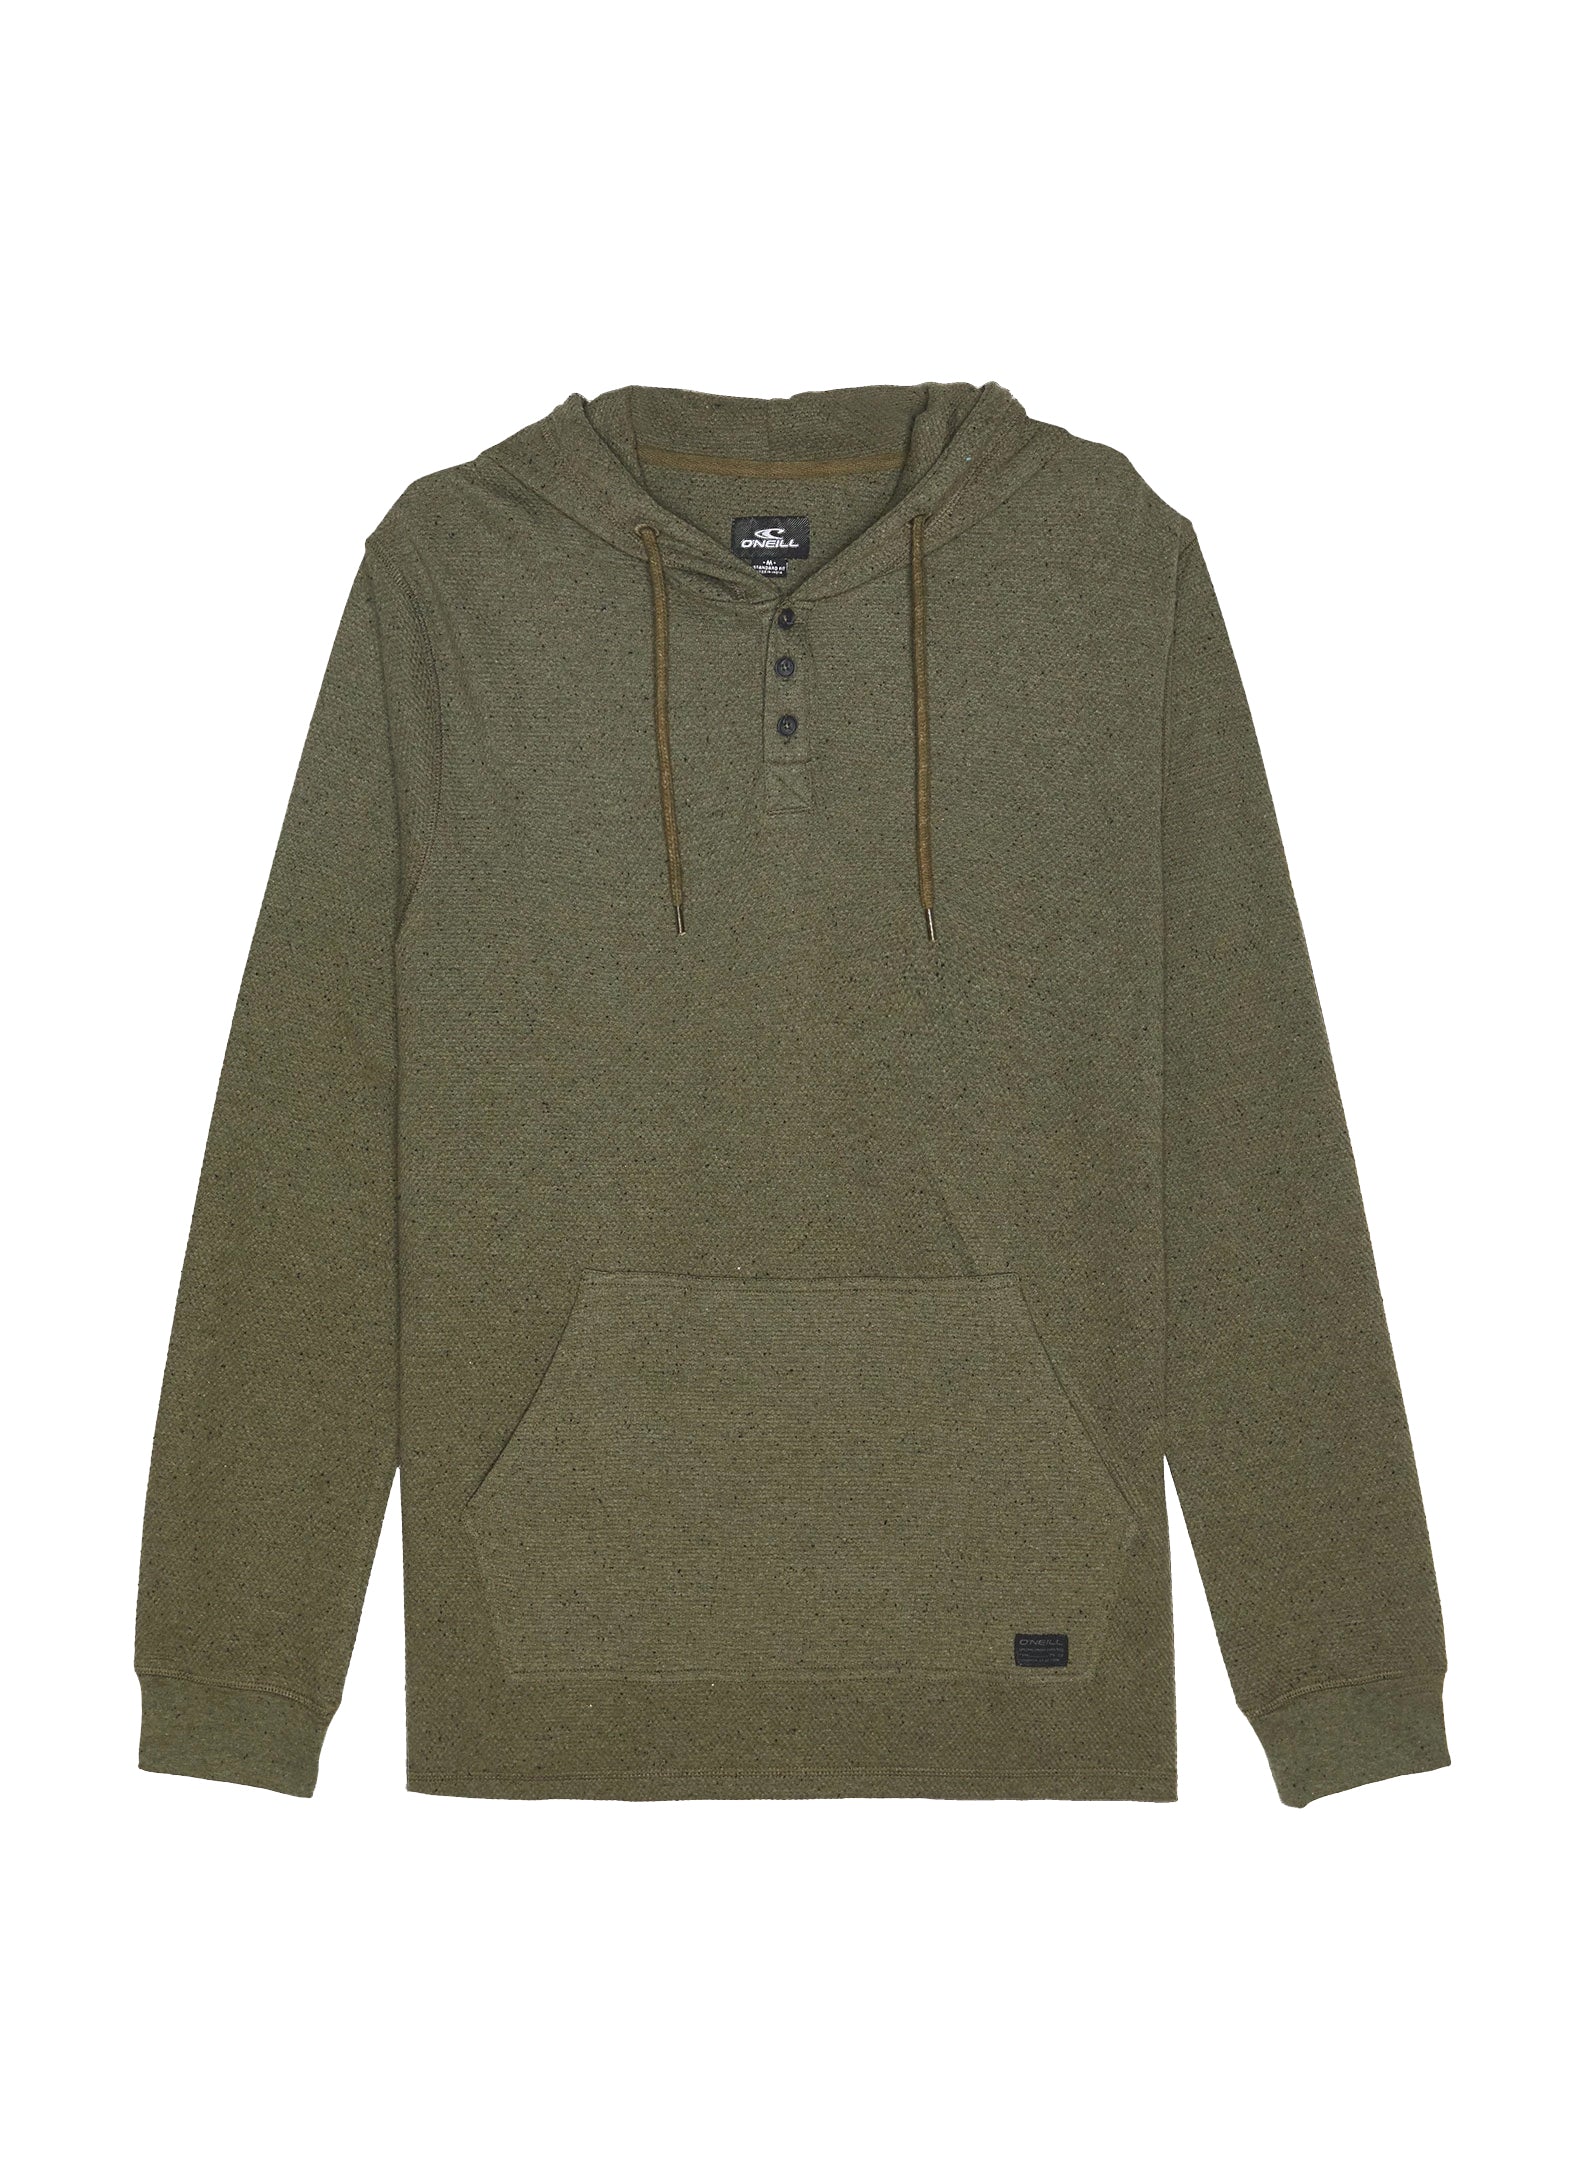 O'neill Apollo Pullover Hoodie OLV-Olive XL